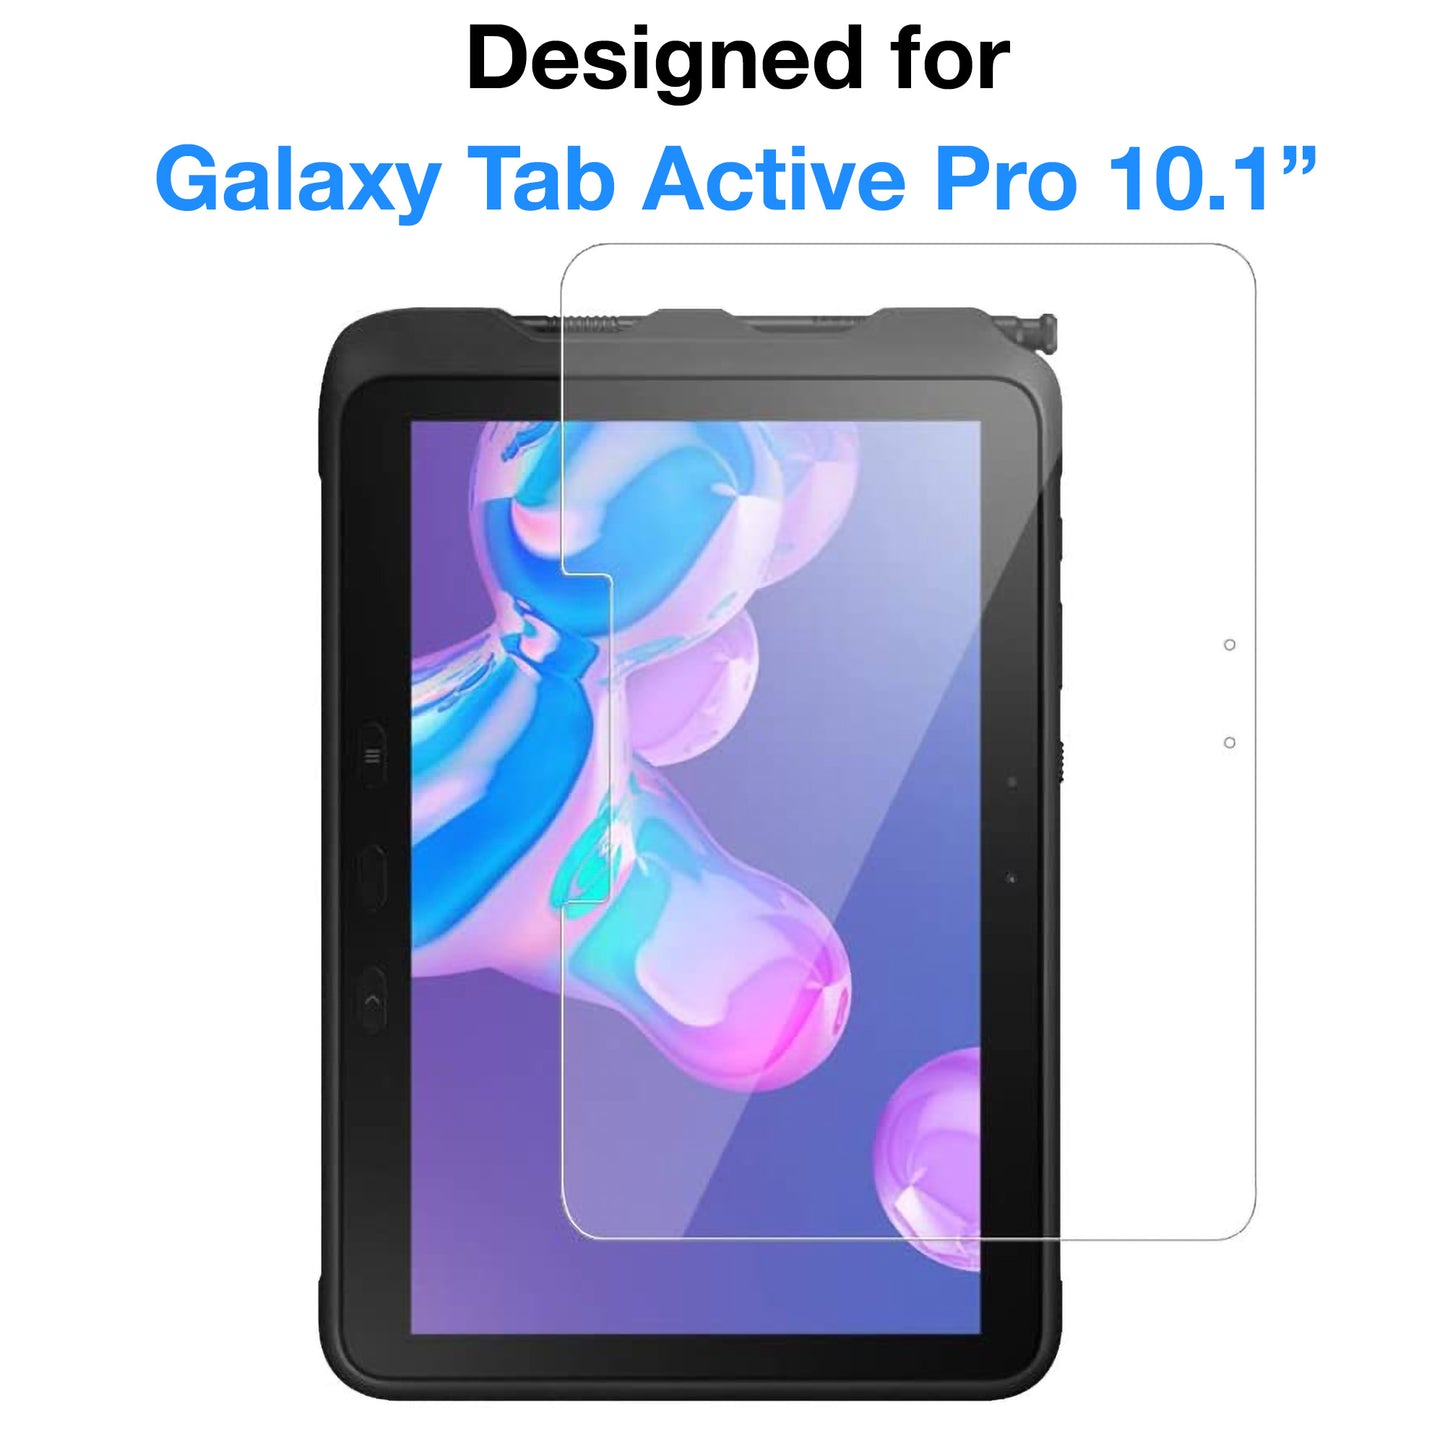 [3 Pack] MEZON Samsung Galaxy Tab Active Pro 10.1" Ultra Clear Film Screen Protector (SM-T545, Clear)